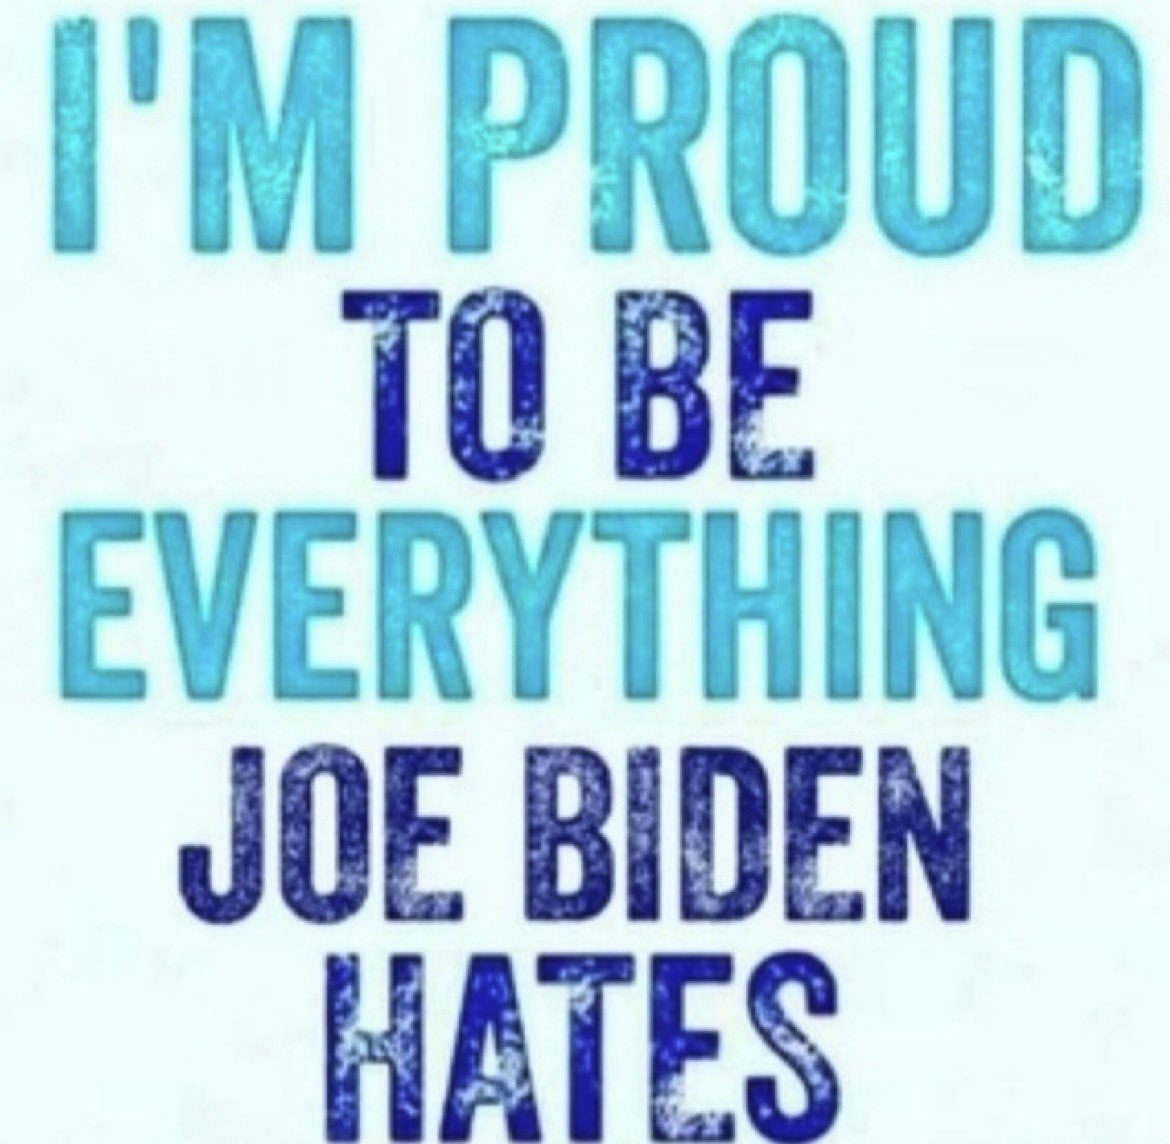 I wear it as a badge of honor. But it’s ok I hate everything Joe stands for.